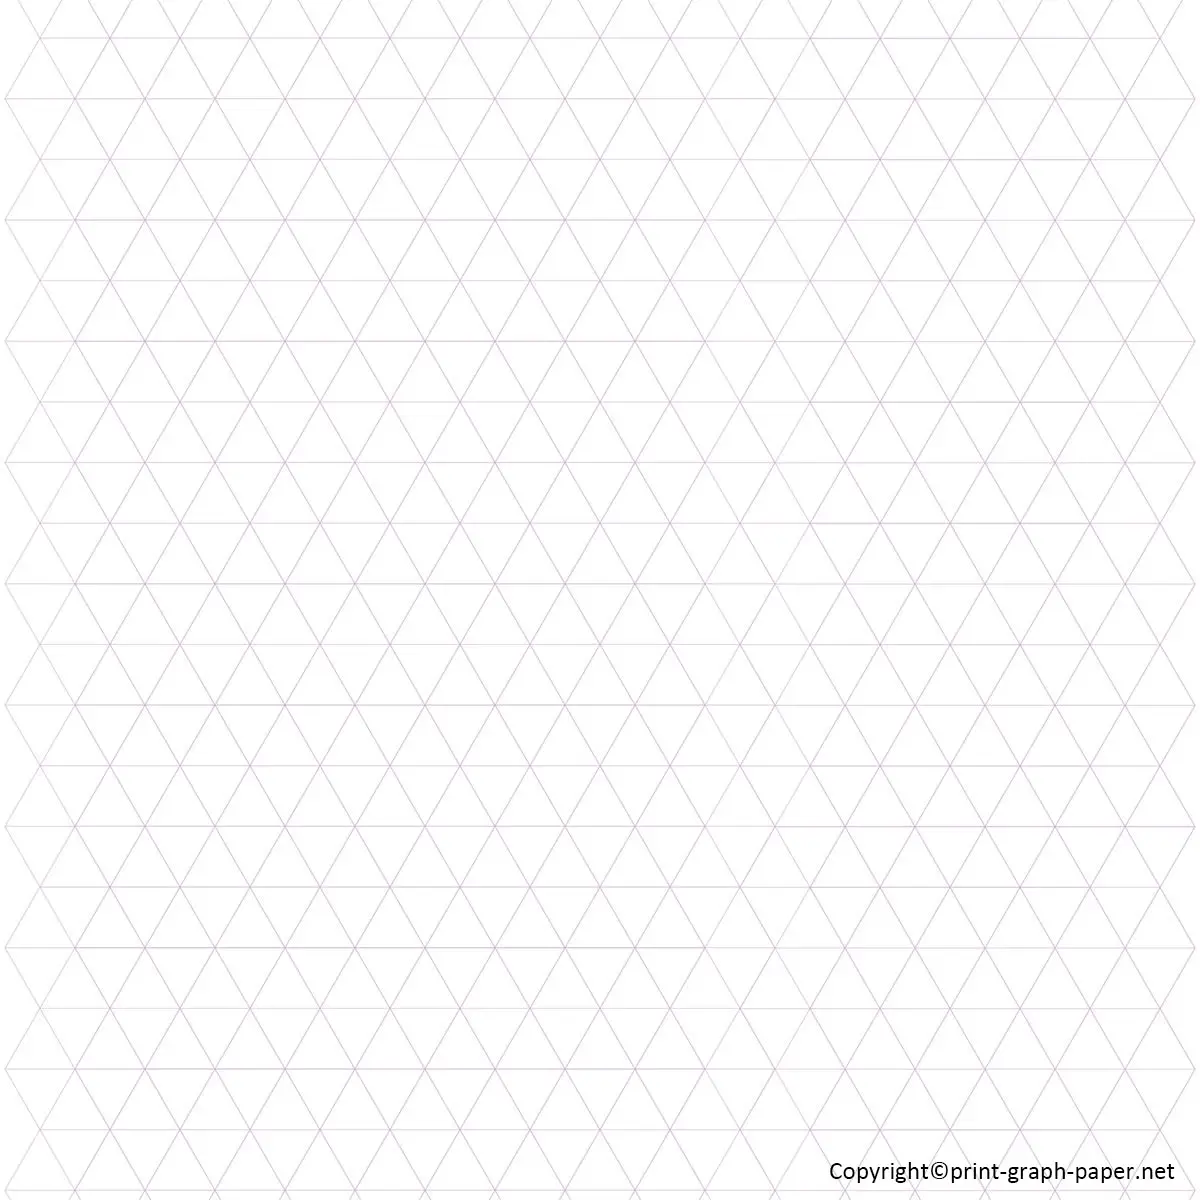 equilateral triangle on graph paper